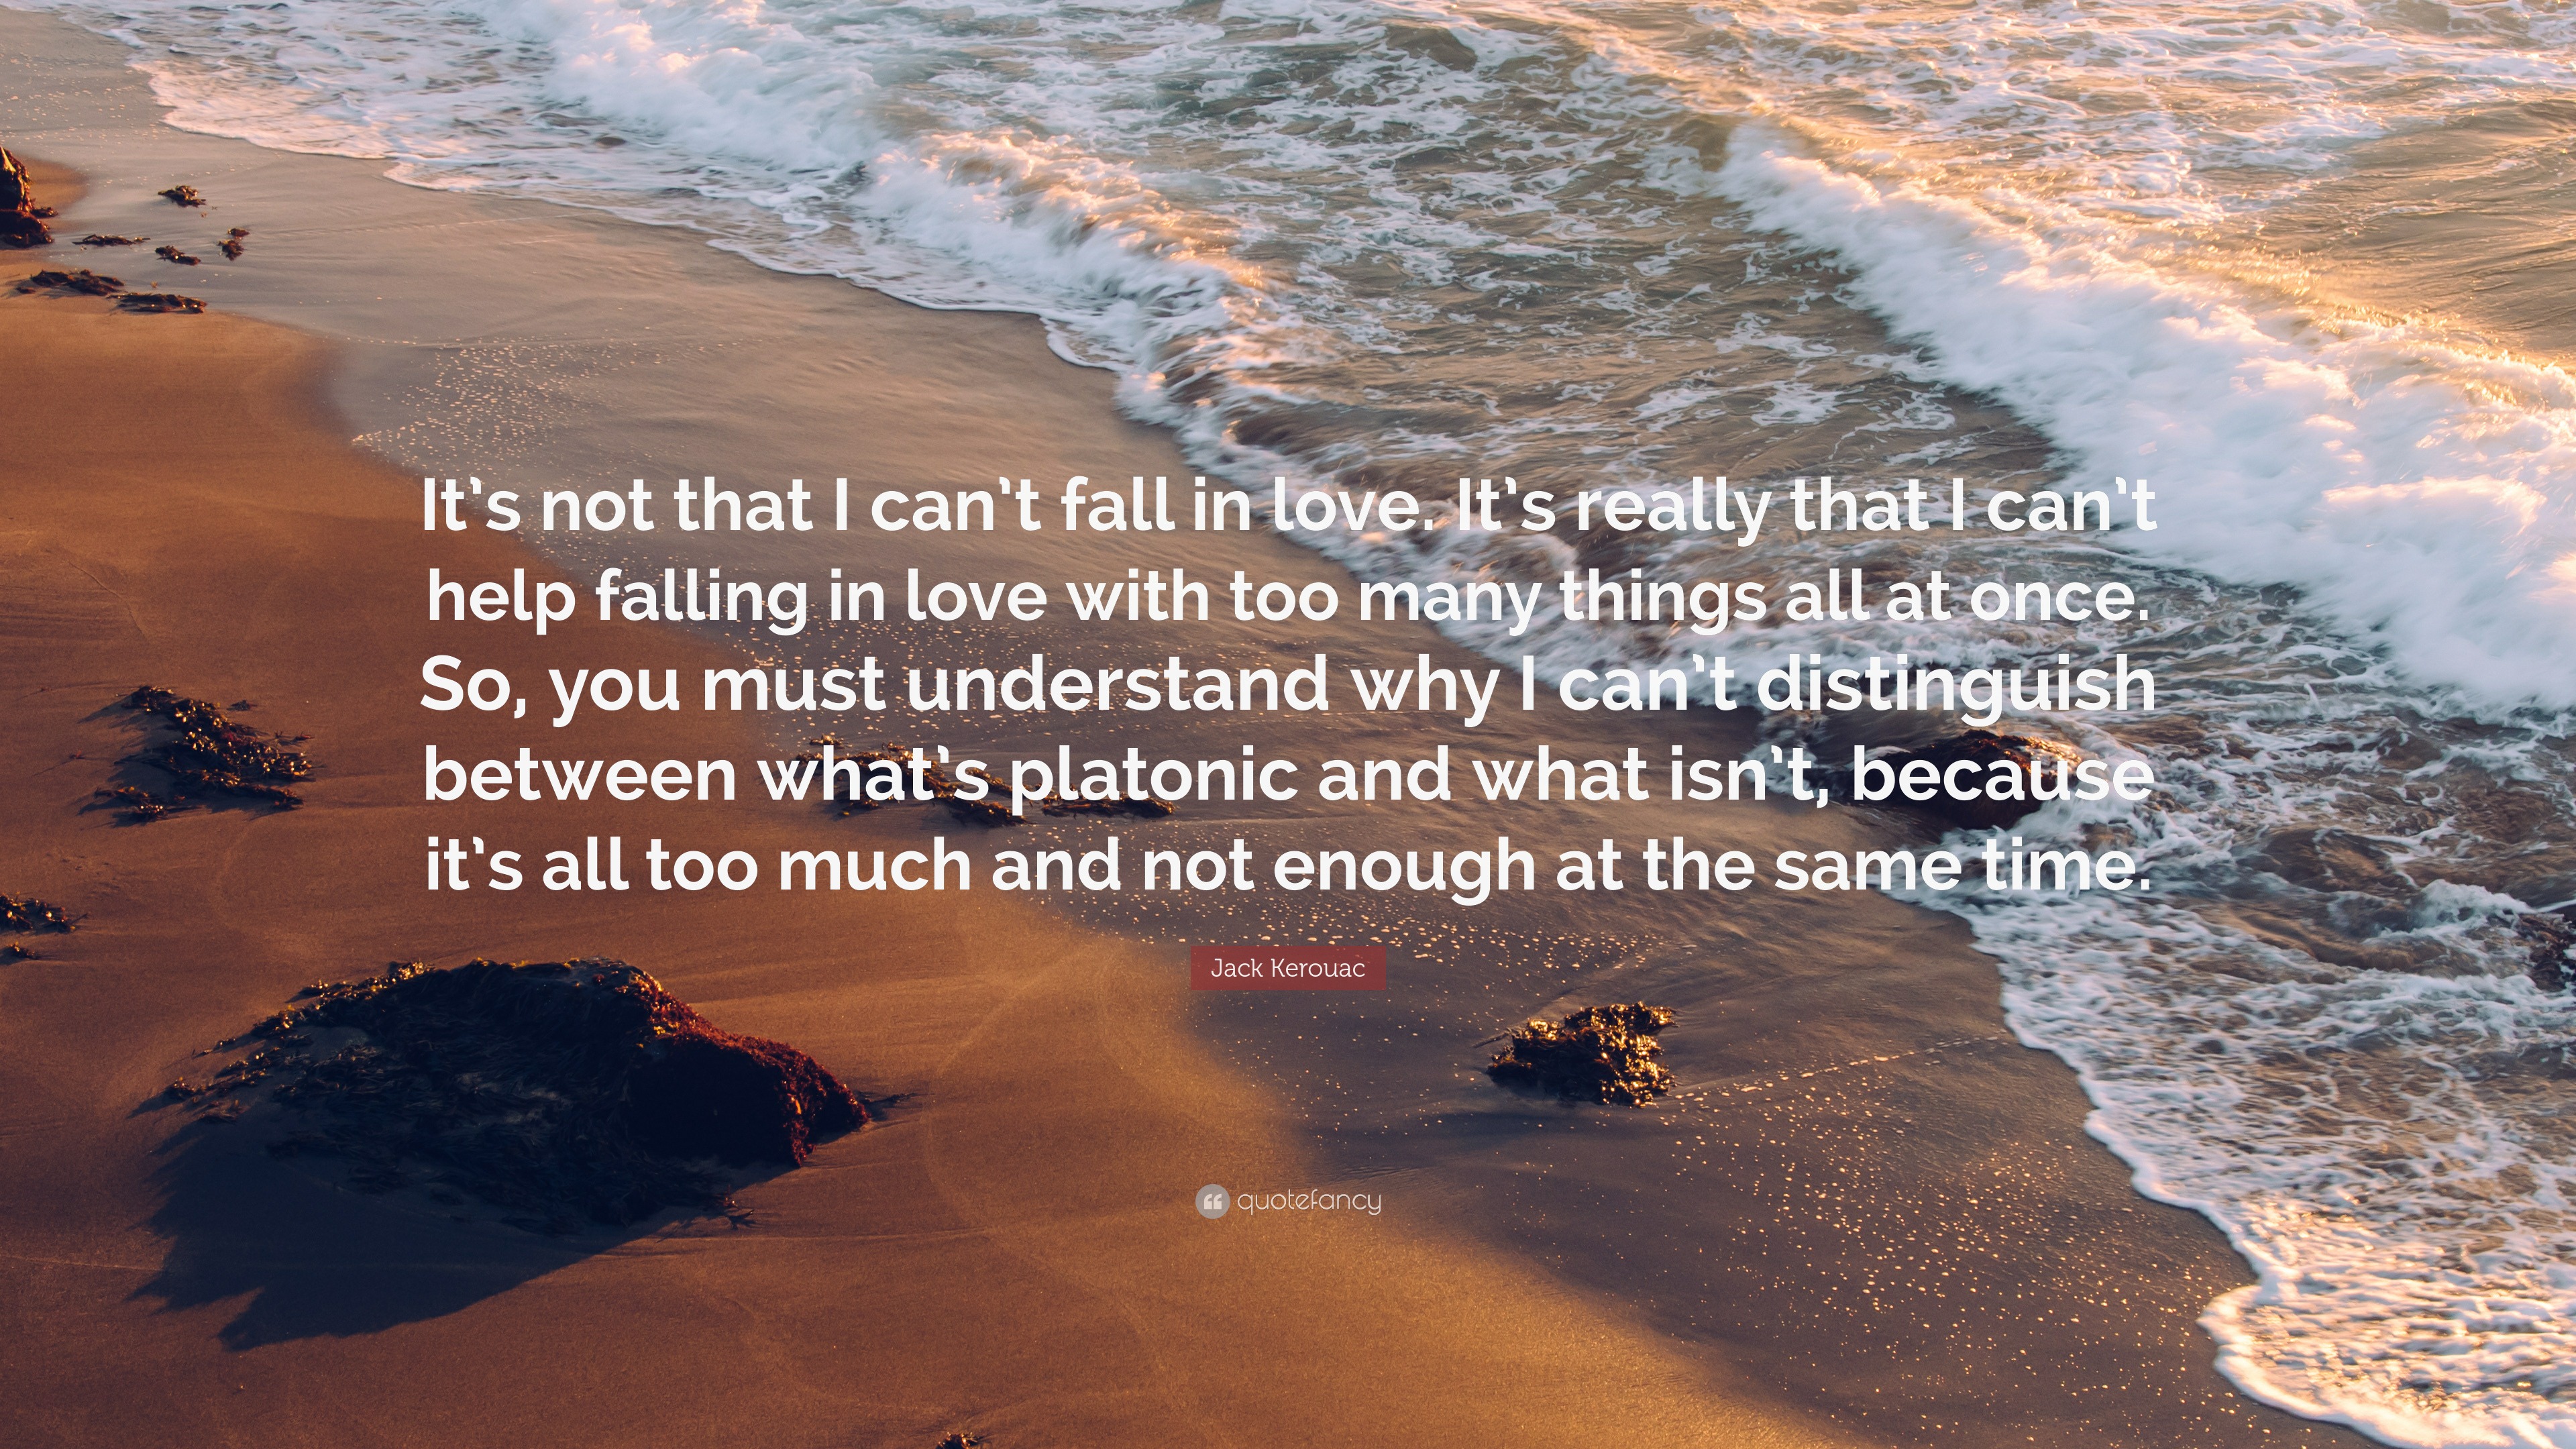 Jack Kerouac Quote: “It’s not that I can’t fall in love. It’s really ...